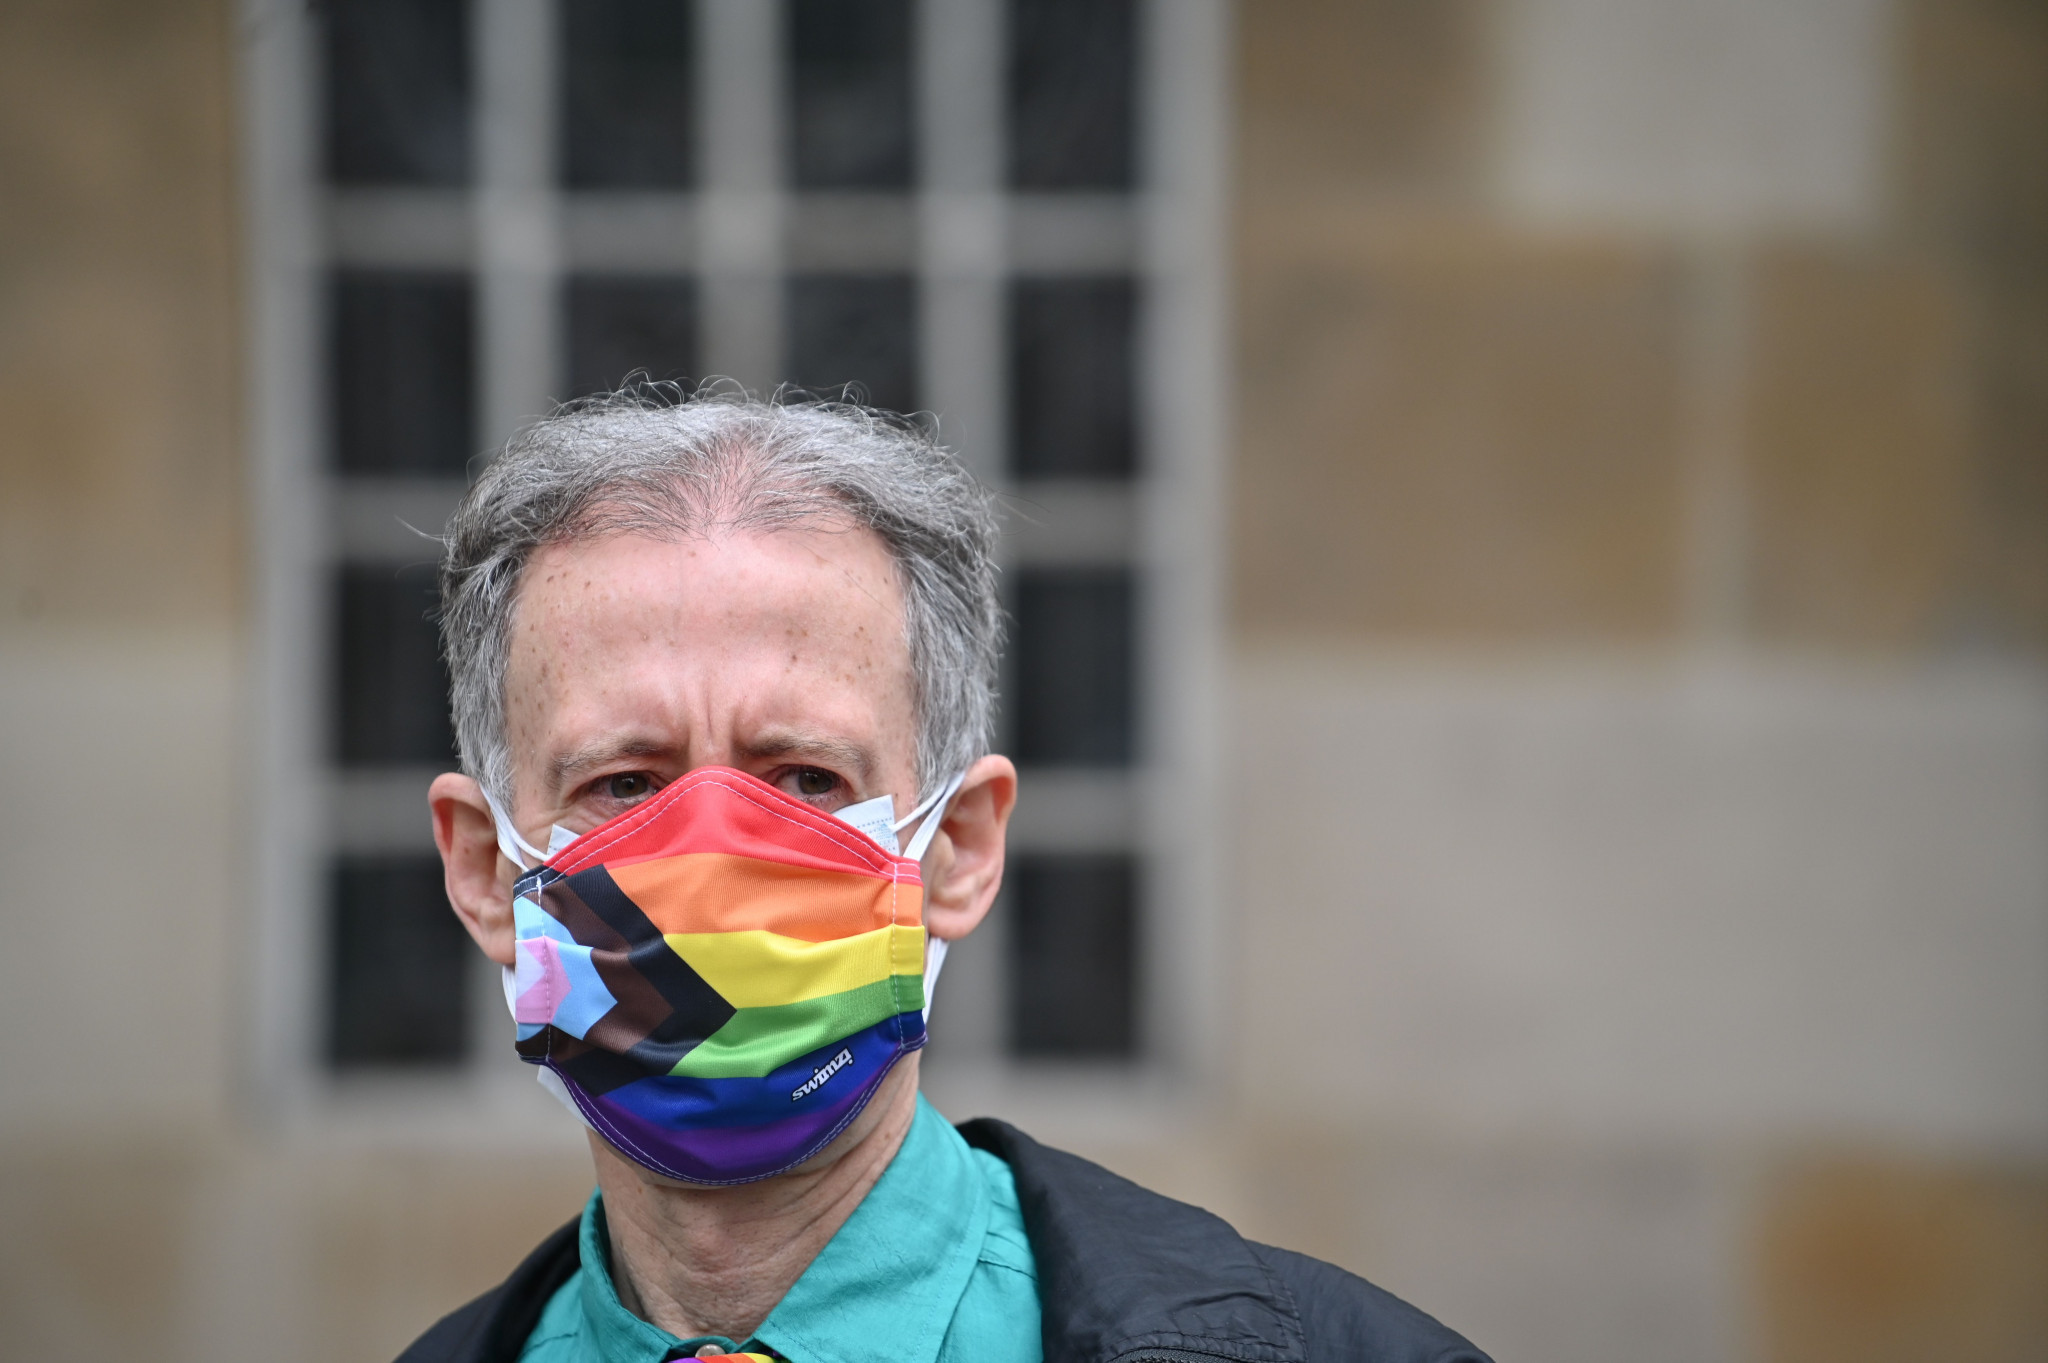 Peter Tatchell has claimed he expects demonstrations during Birmingham 2022 ©Getty Images